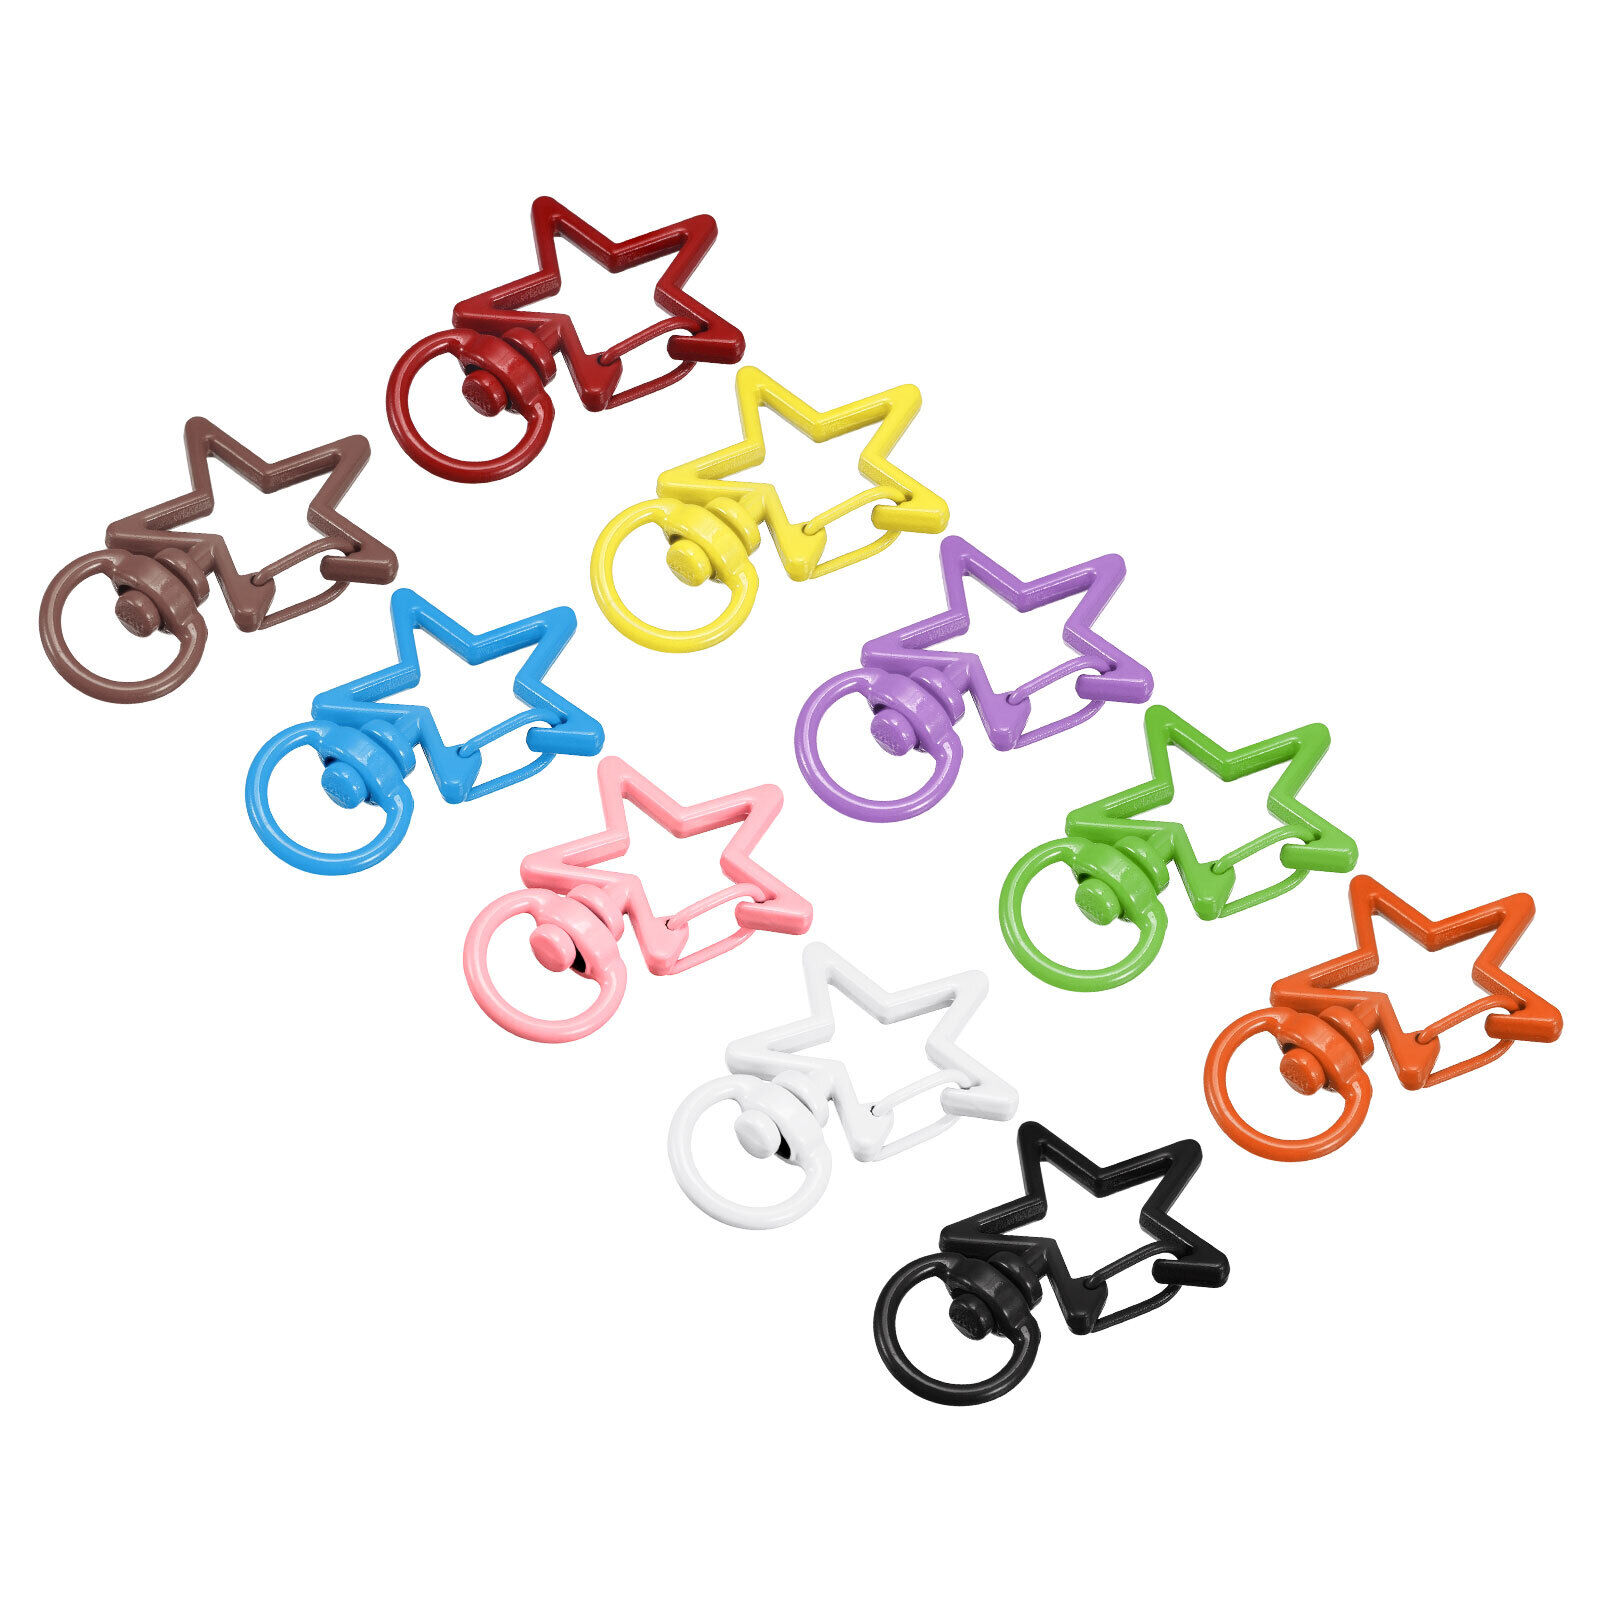 Swivel Clasps Snap Hook, Star Shape Lobster Claw Clasp For Diy, Set Of 10 Colors